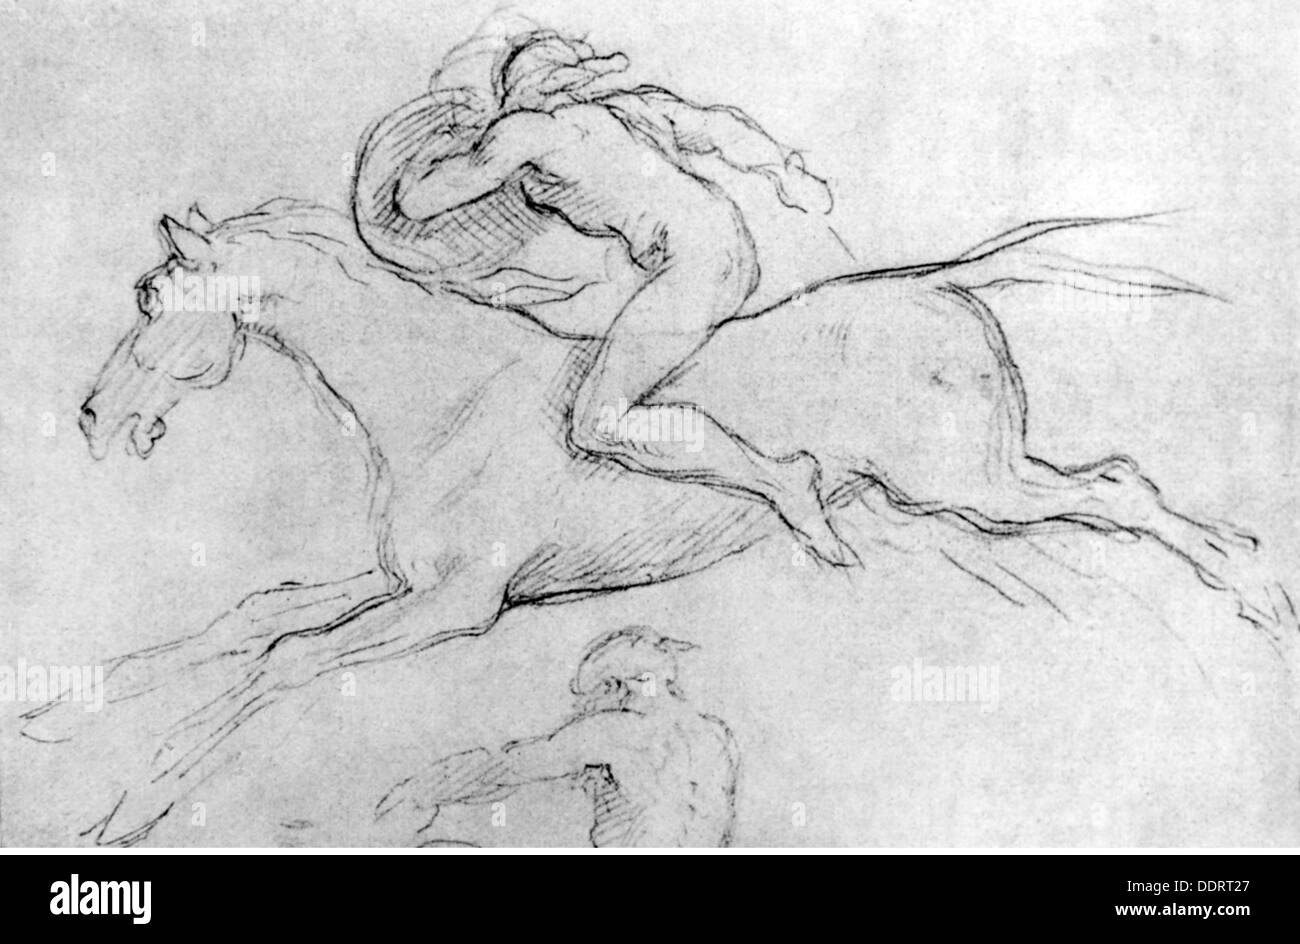 Mörike, Eduard, 8.9.1804 - 4.6. 1875, German author / writer, works, 'Der Bauer und sein Sohn' (The Peasant and His Son), 1839, drawing by Moritz von Schwind (1804 - 1871), 19th century, Artist's Copyright has not to be cleared Stock Photo